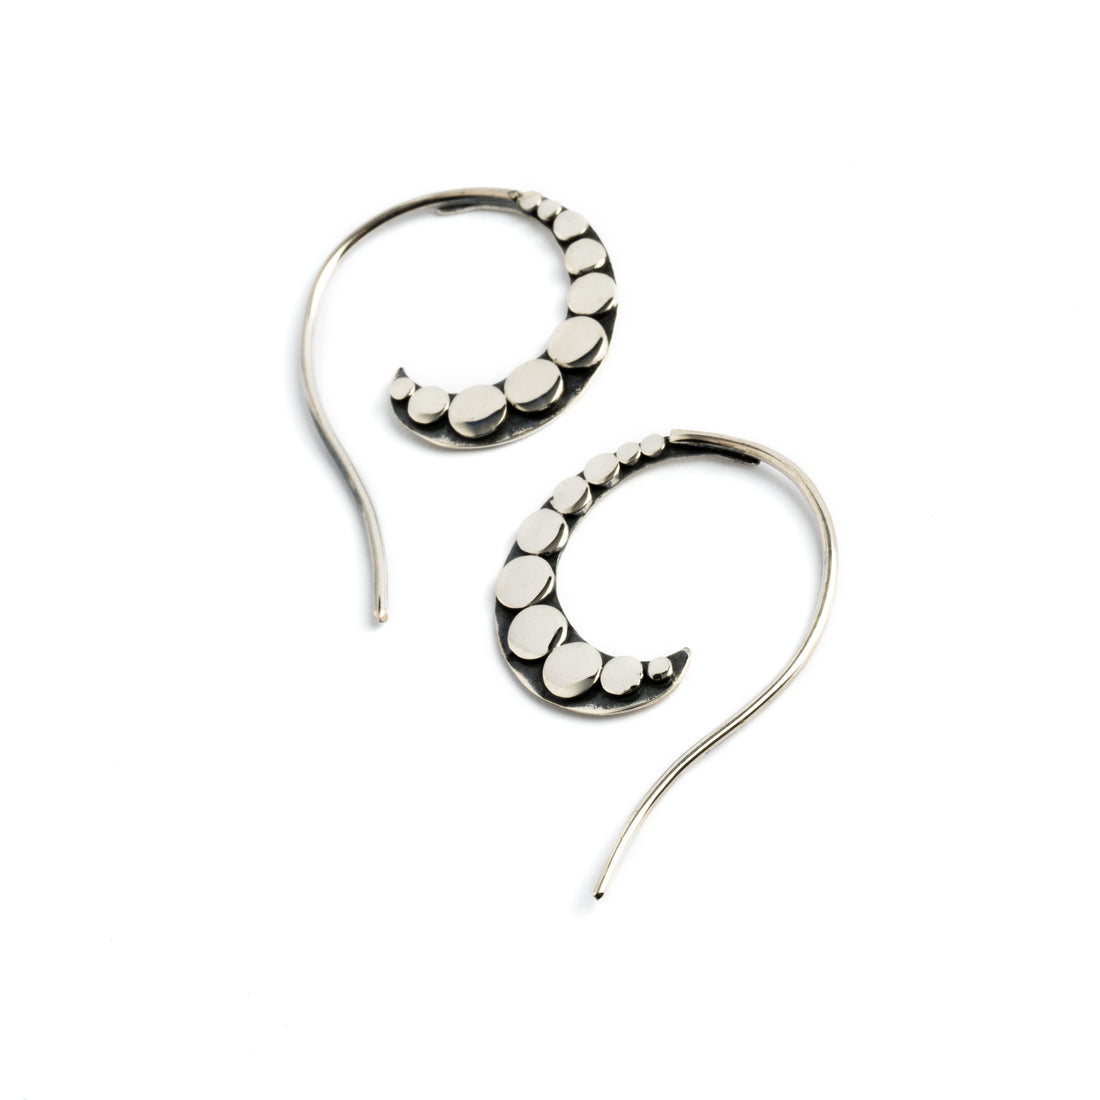 Spiral wire earrings with circles